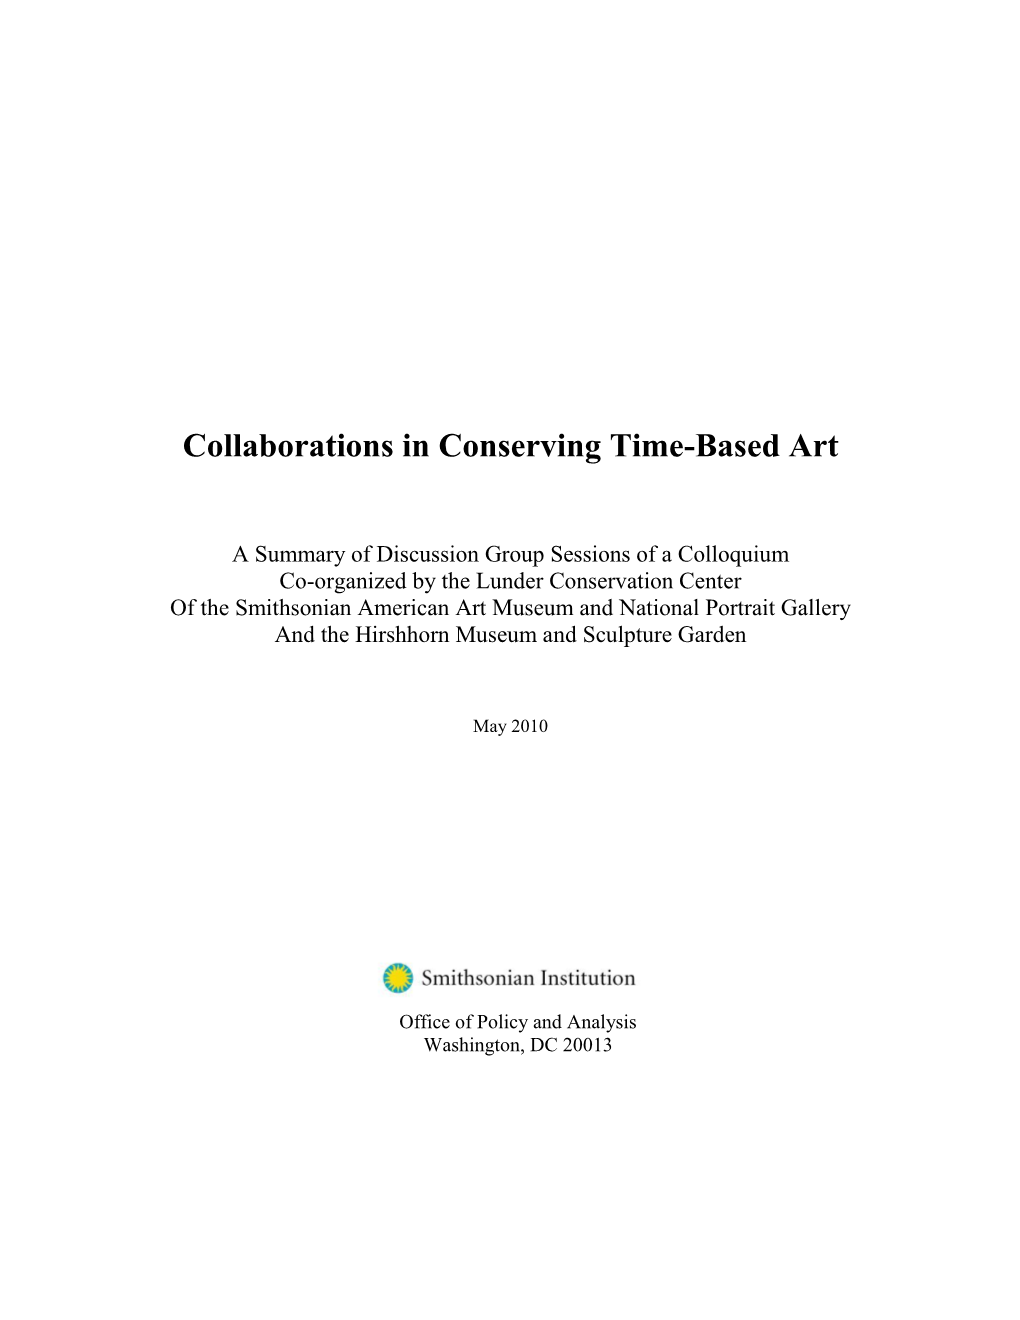 Collaborations in Conserving Time-Based Art